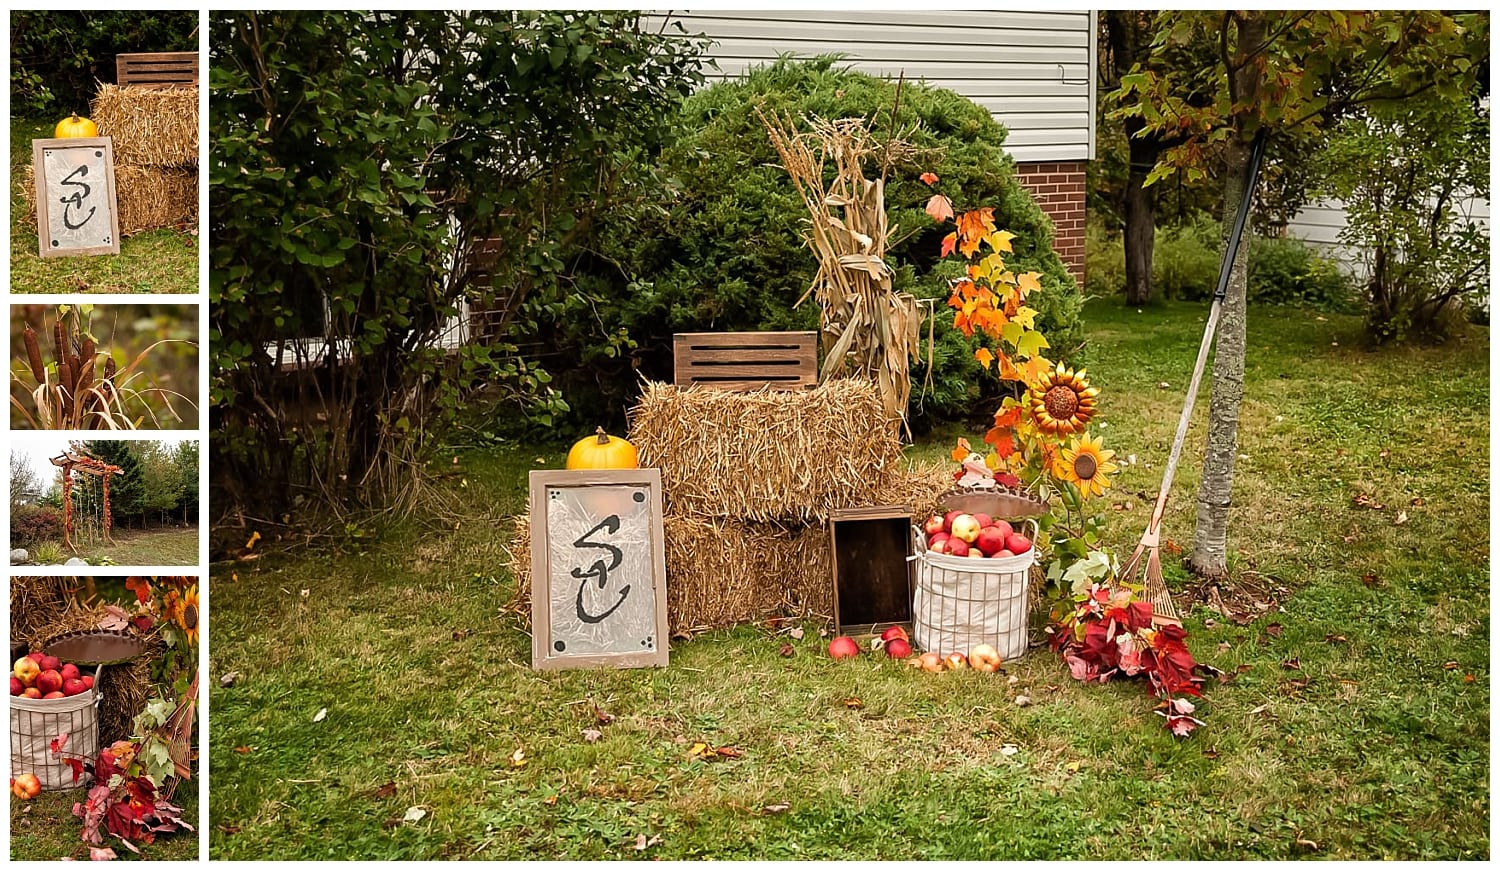 A backyard wedding set up in the fall with apples, raking leaves and wedding arch with autumn leaves.